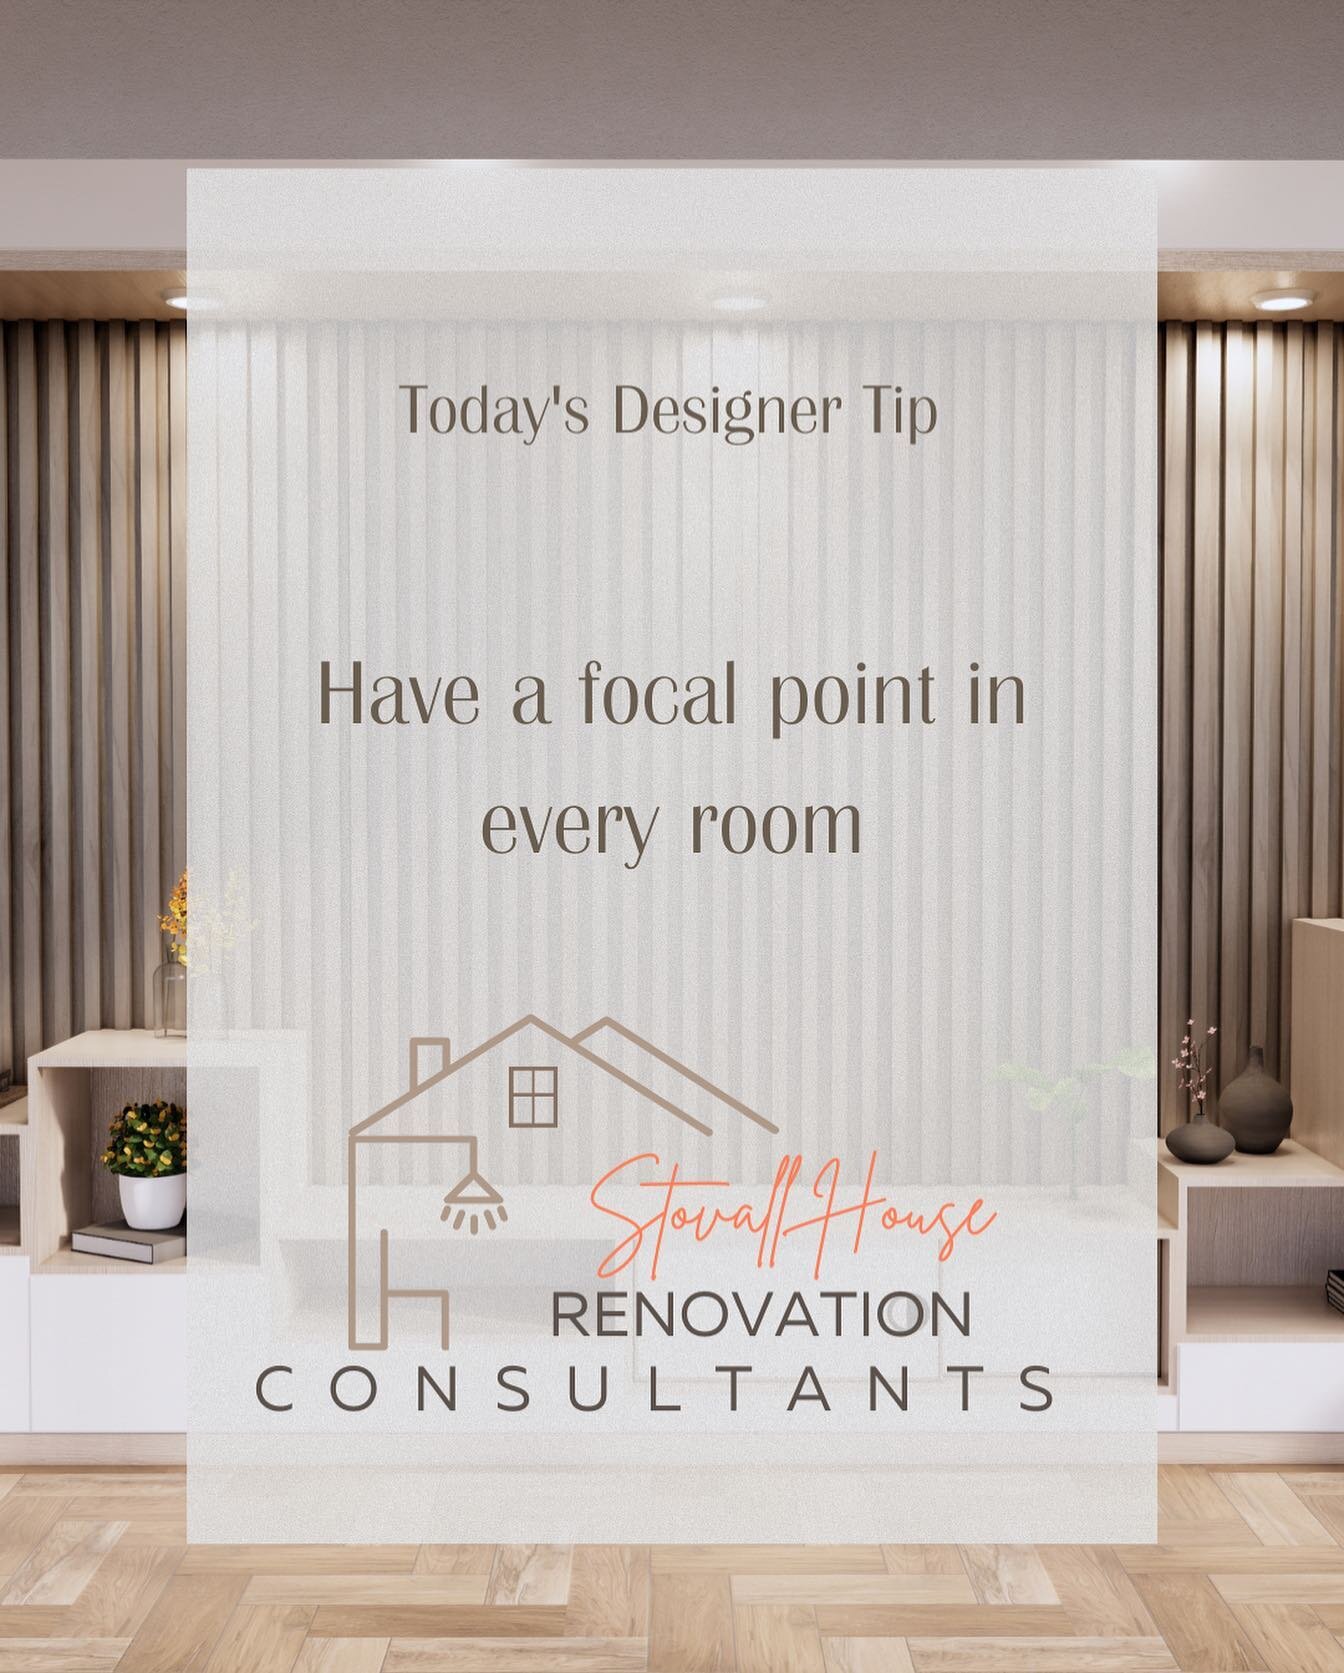 Having a focal point in every room can help create a sense of balance and visual interest. This could be a piece of furniture, a piece of artwork, or even a unique architectural feature in the room. The focal point should be a natural element that dr